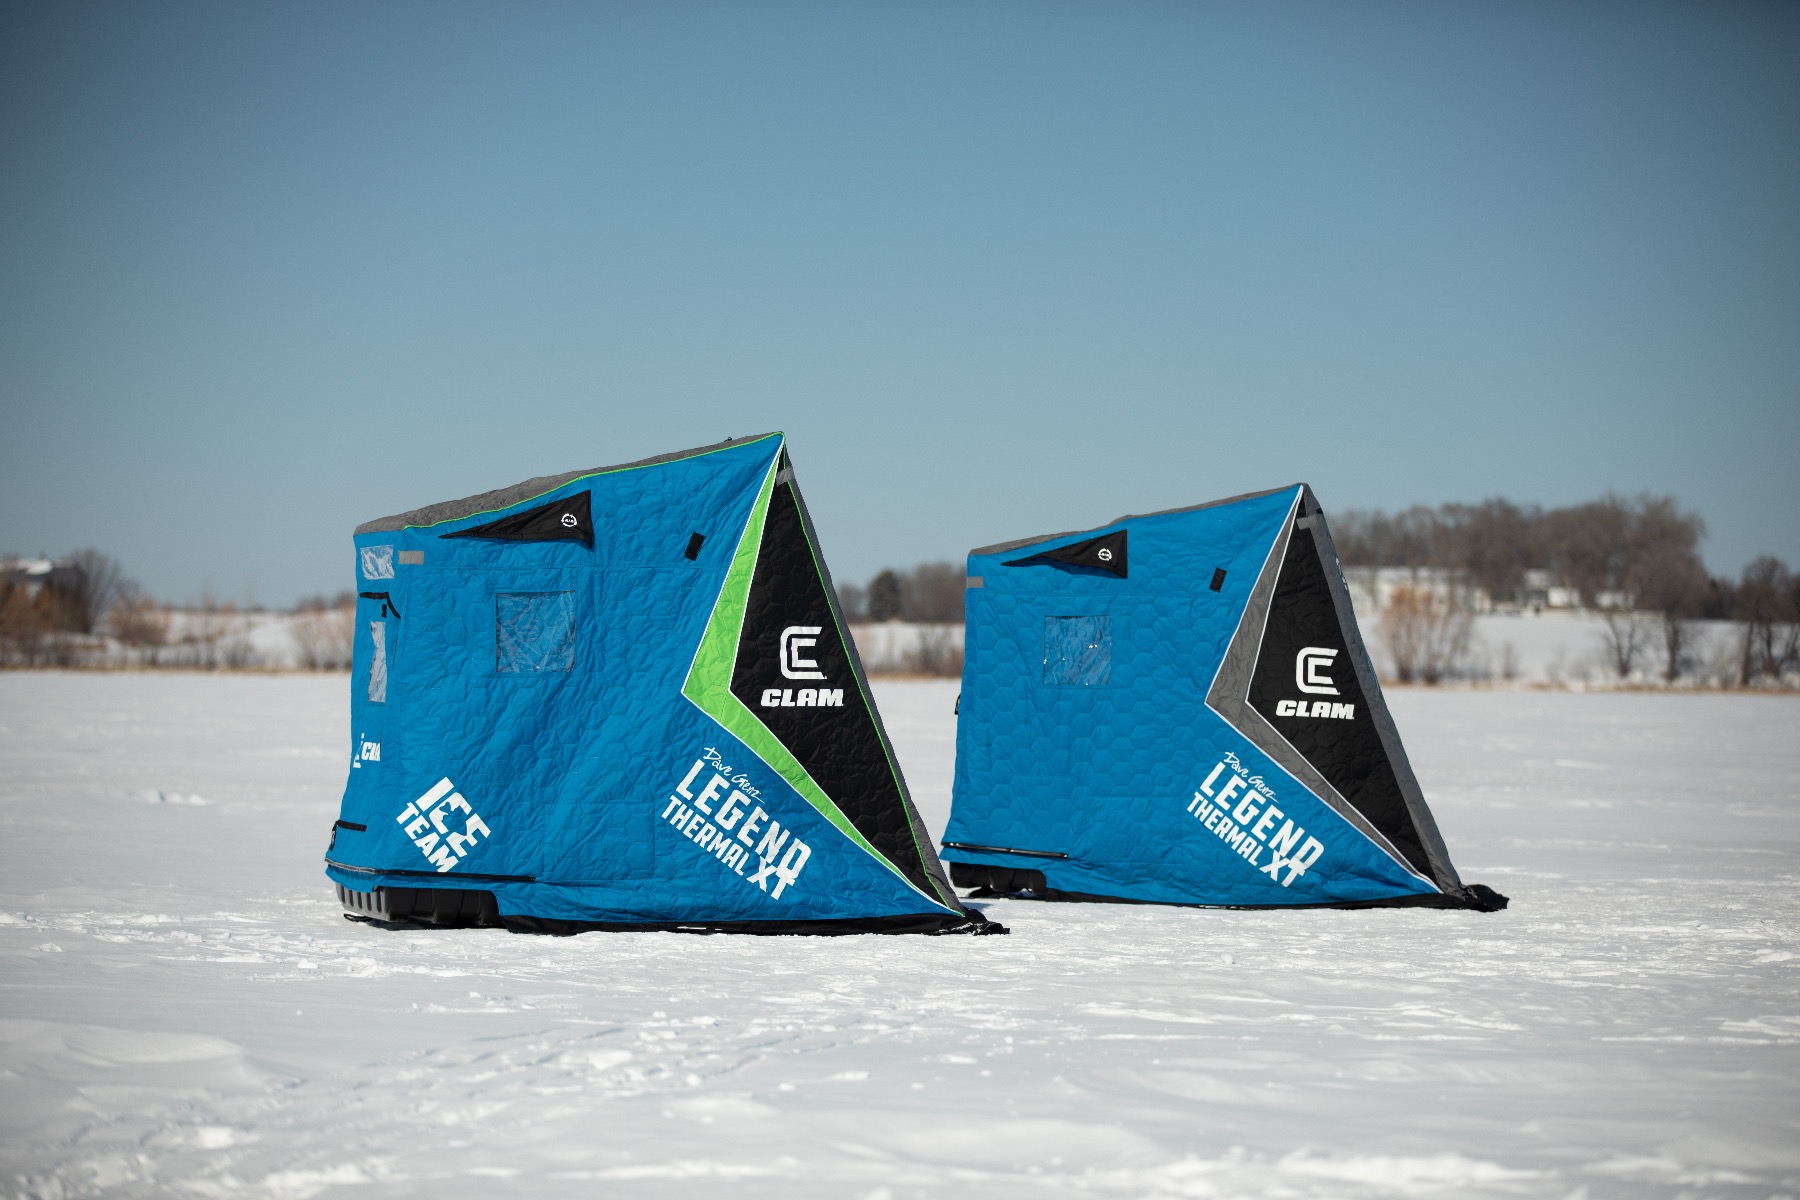 Clam Legend XT Thermal - 1 Angler Ice Fishing Shelter 16849 - The Home Depot